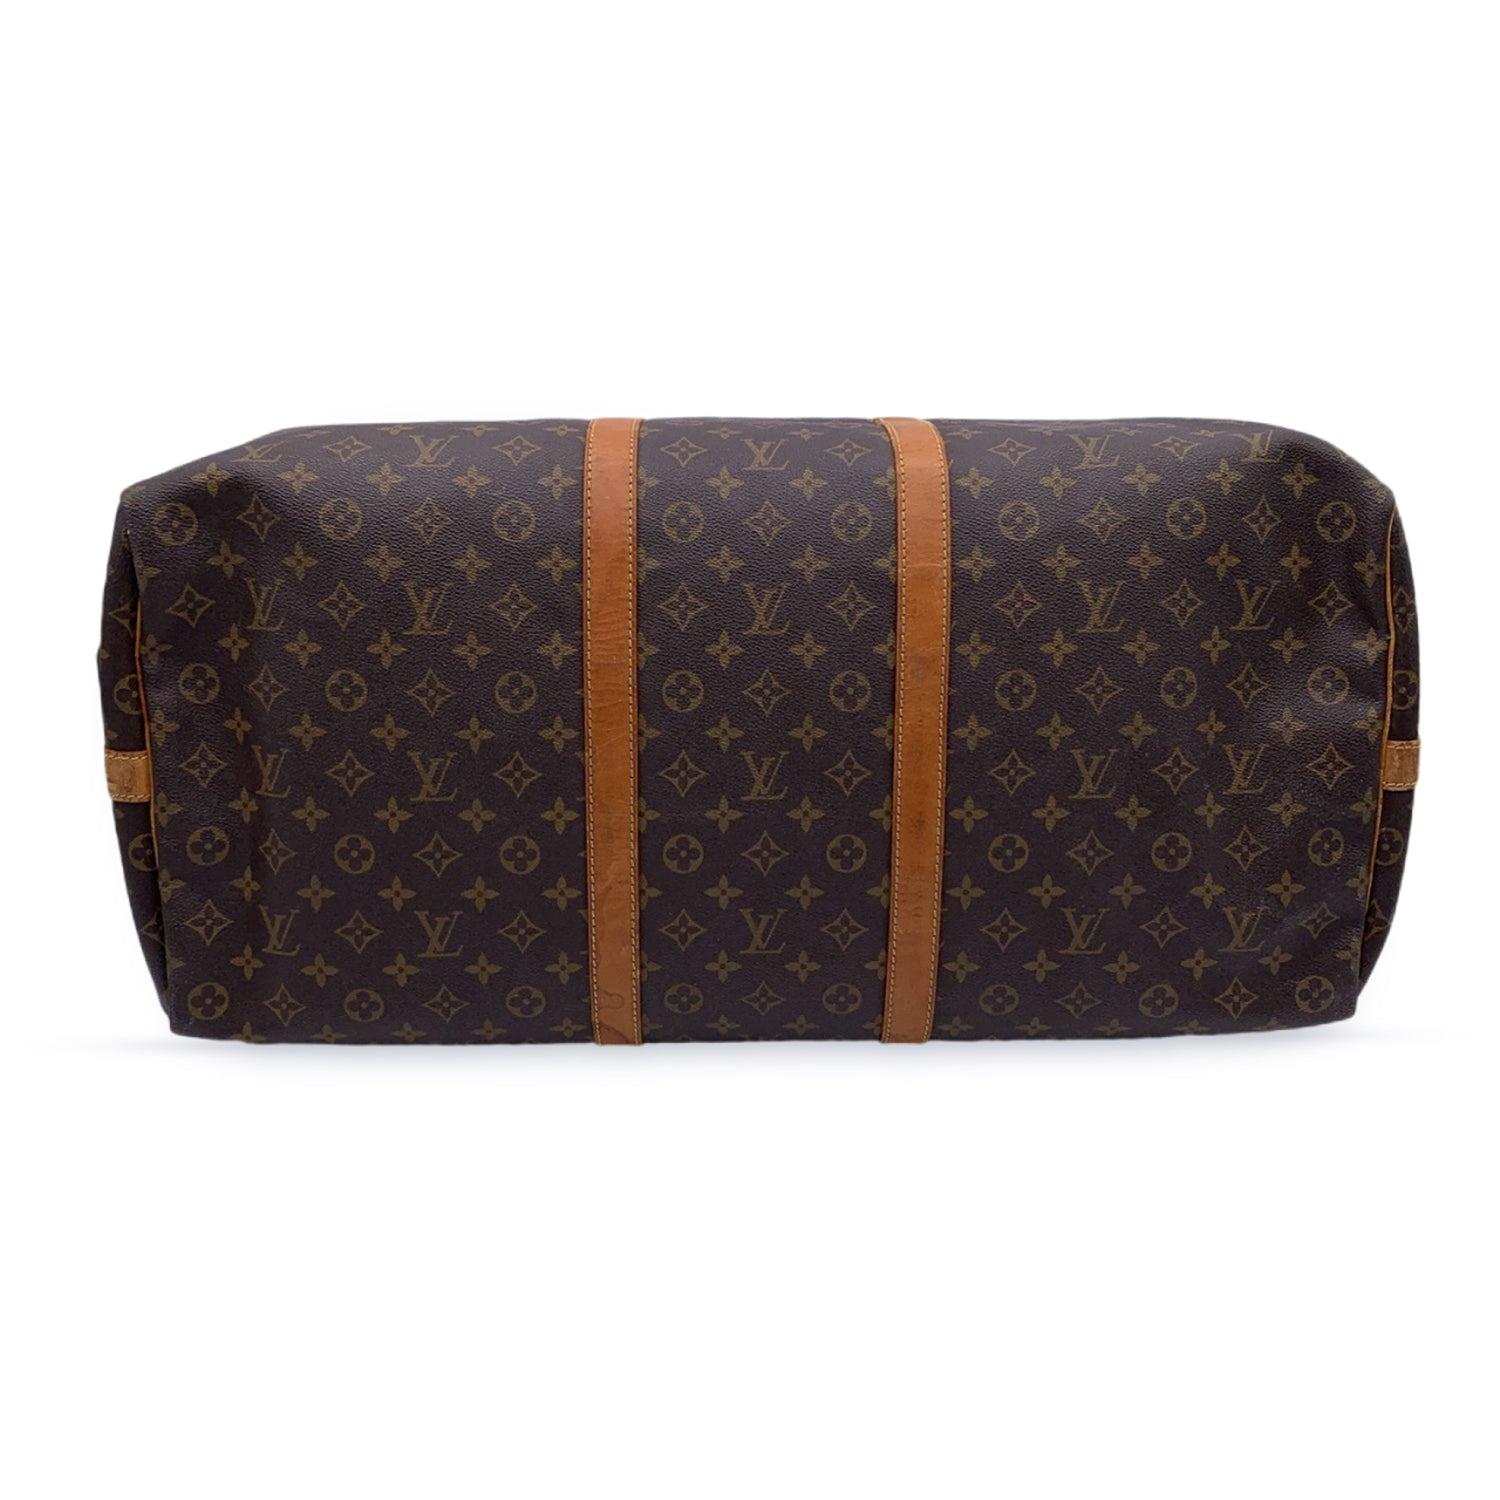 Louis Vuitton Monogram Keepall Bandouliere 60 Travel Bag M41412 In Good Condition For Sale In Rome, Rome